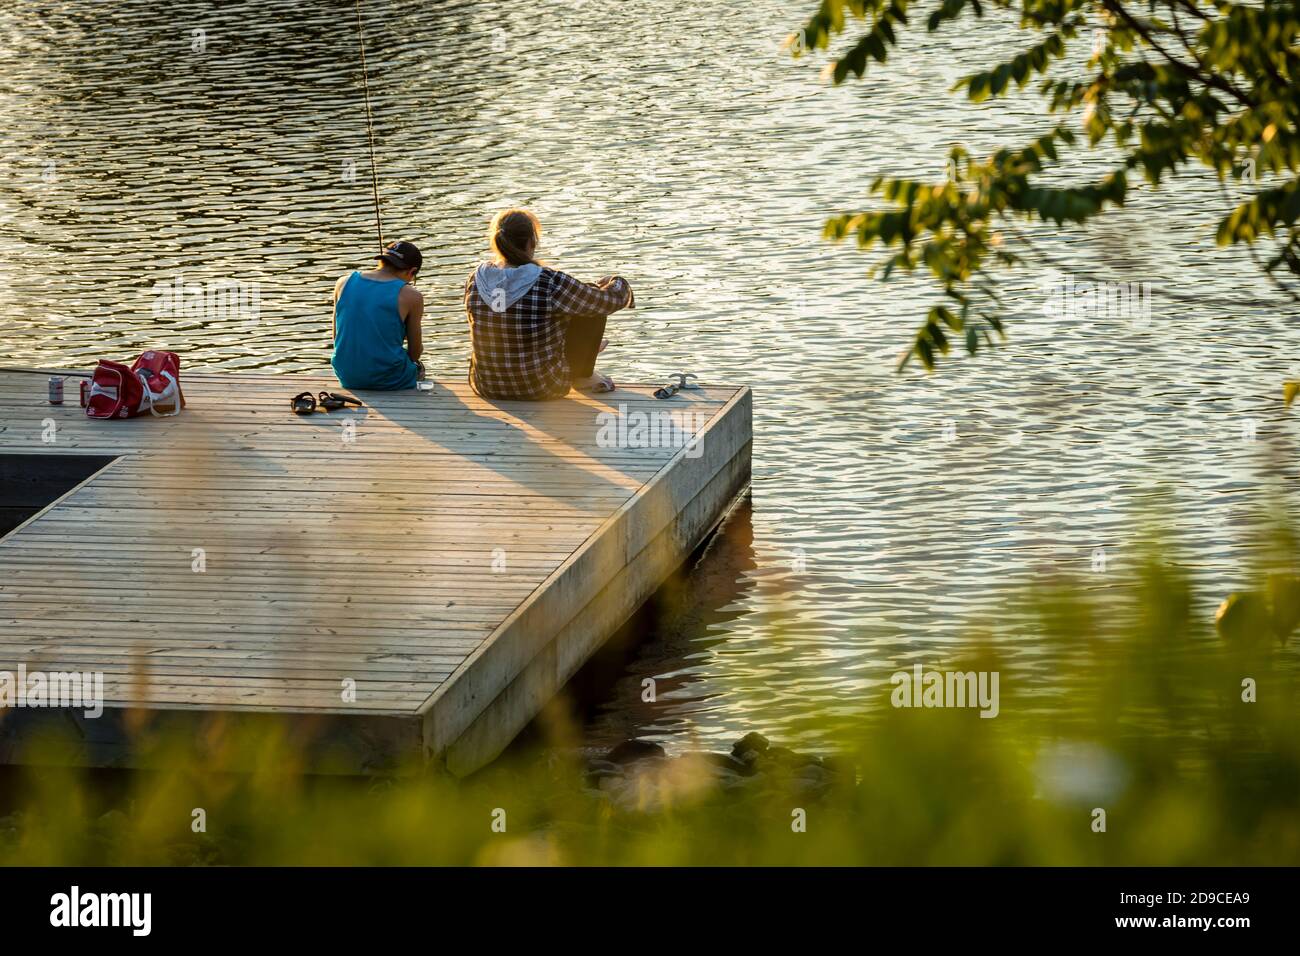 Two people firshing from a dock in Huntsville Ontario, with late afternoon light. Stock Photo